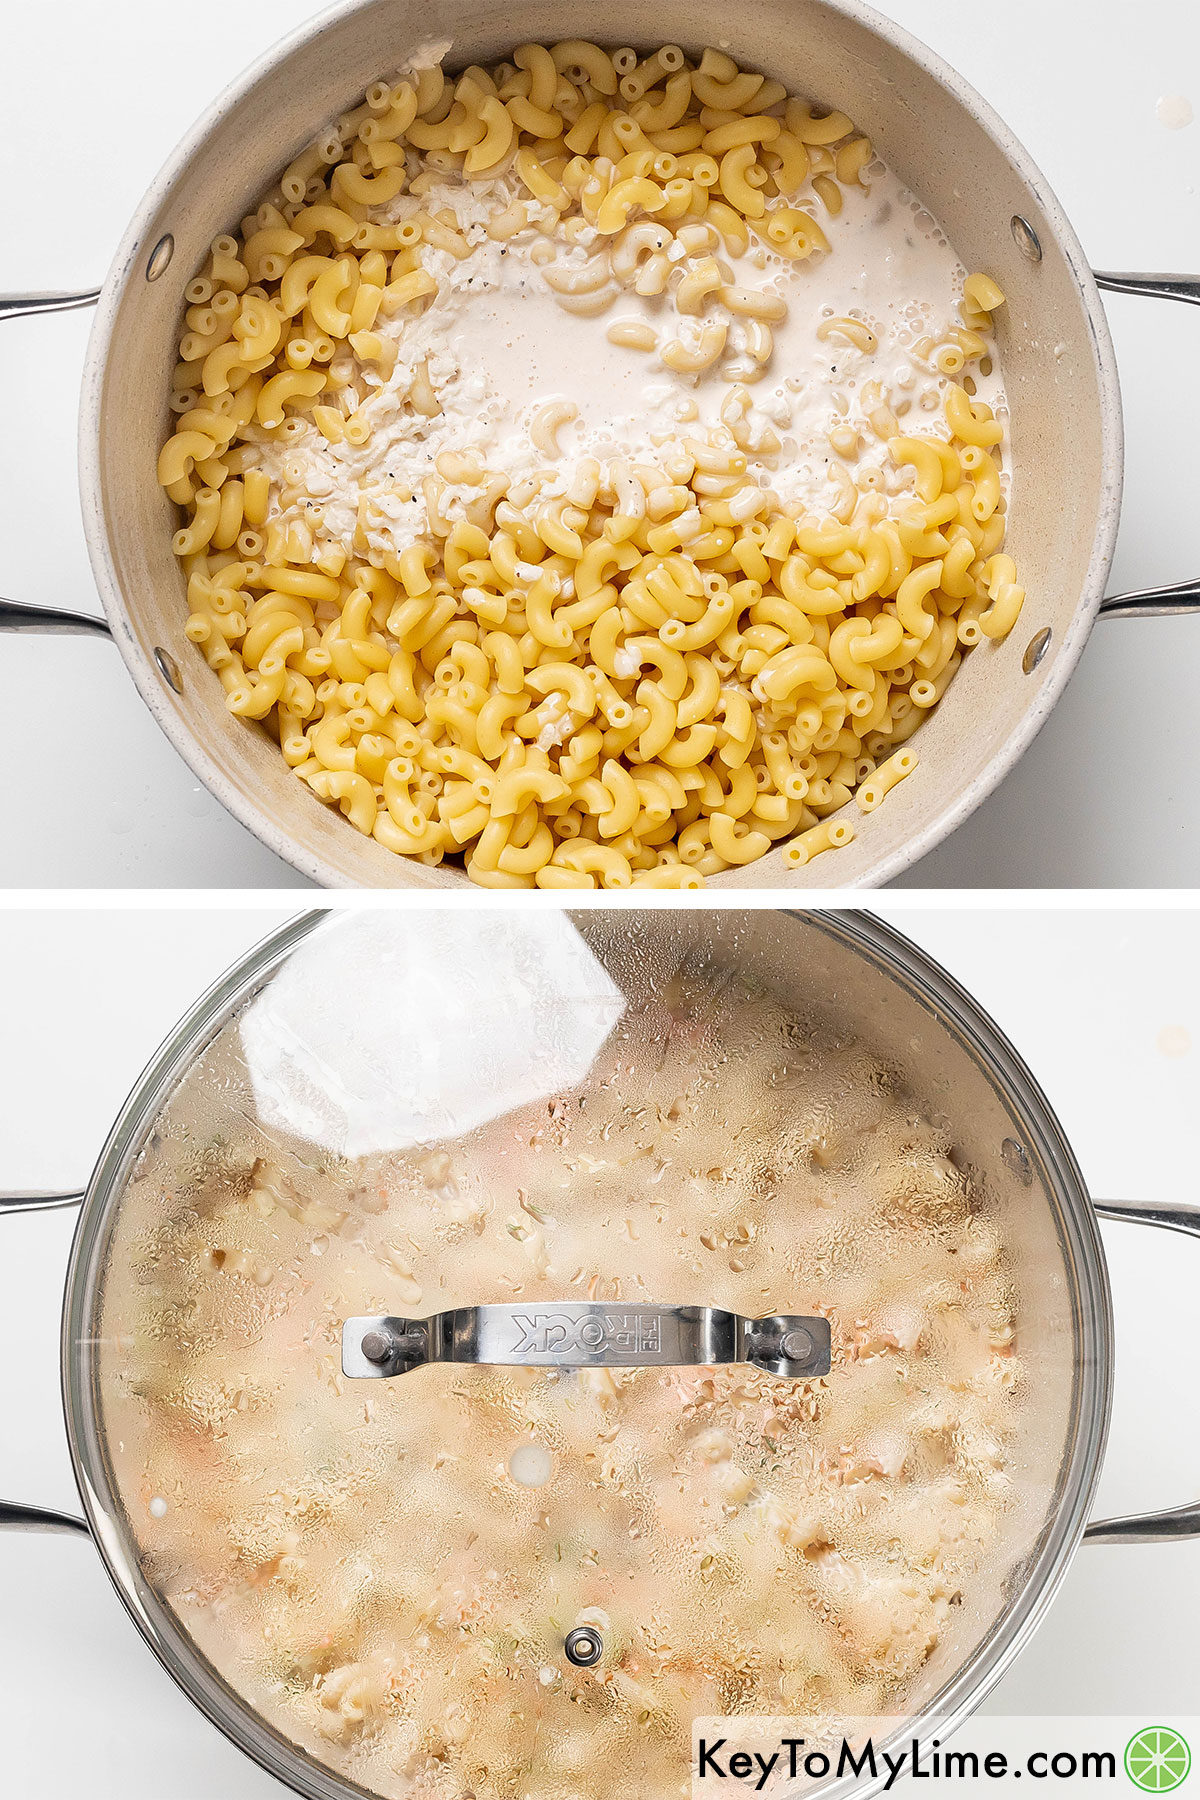 Mixing in half the dressing then covering with a lid and letting the macaroni cool.